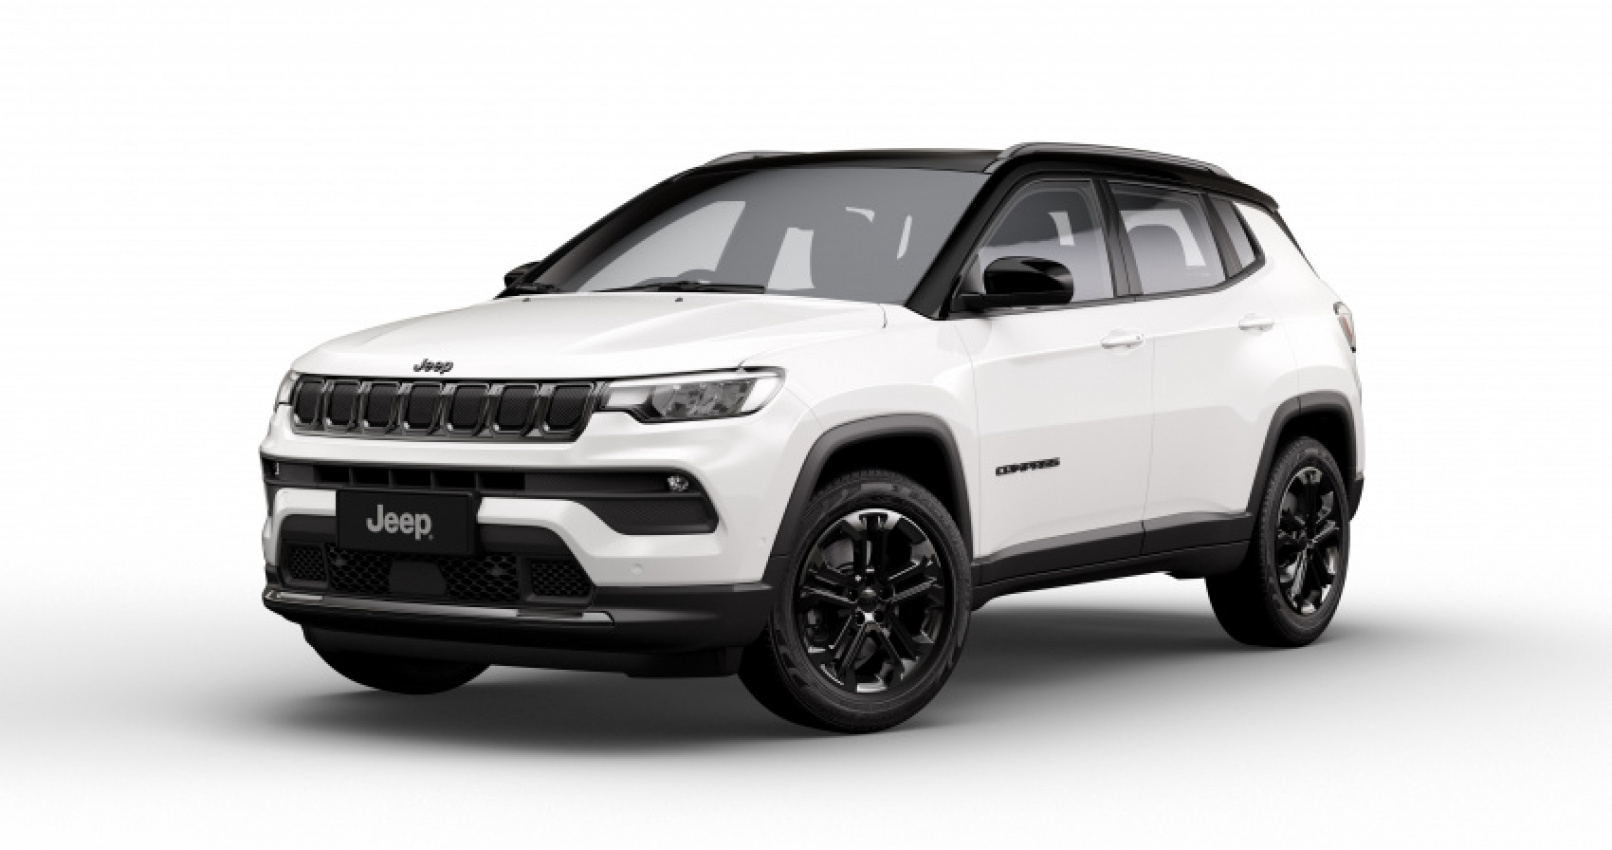 autos, awd 4wd suv, jeep, reviews, awd suv, jeep compass, jeep compass night eagle, jeep news, limited, small suv news, trailhawk, jeep compass line-up for model year 2022